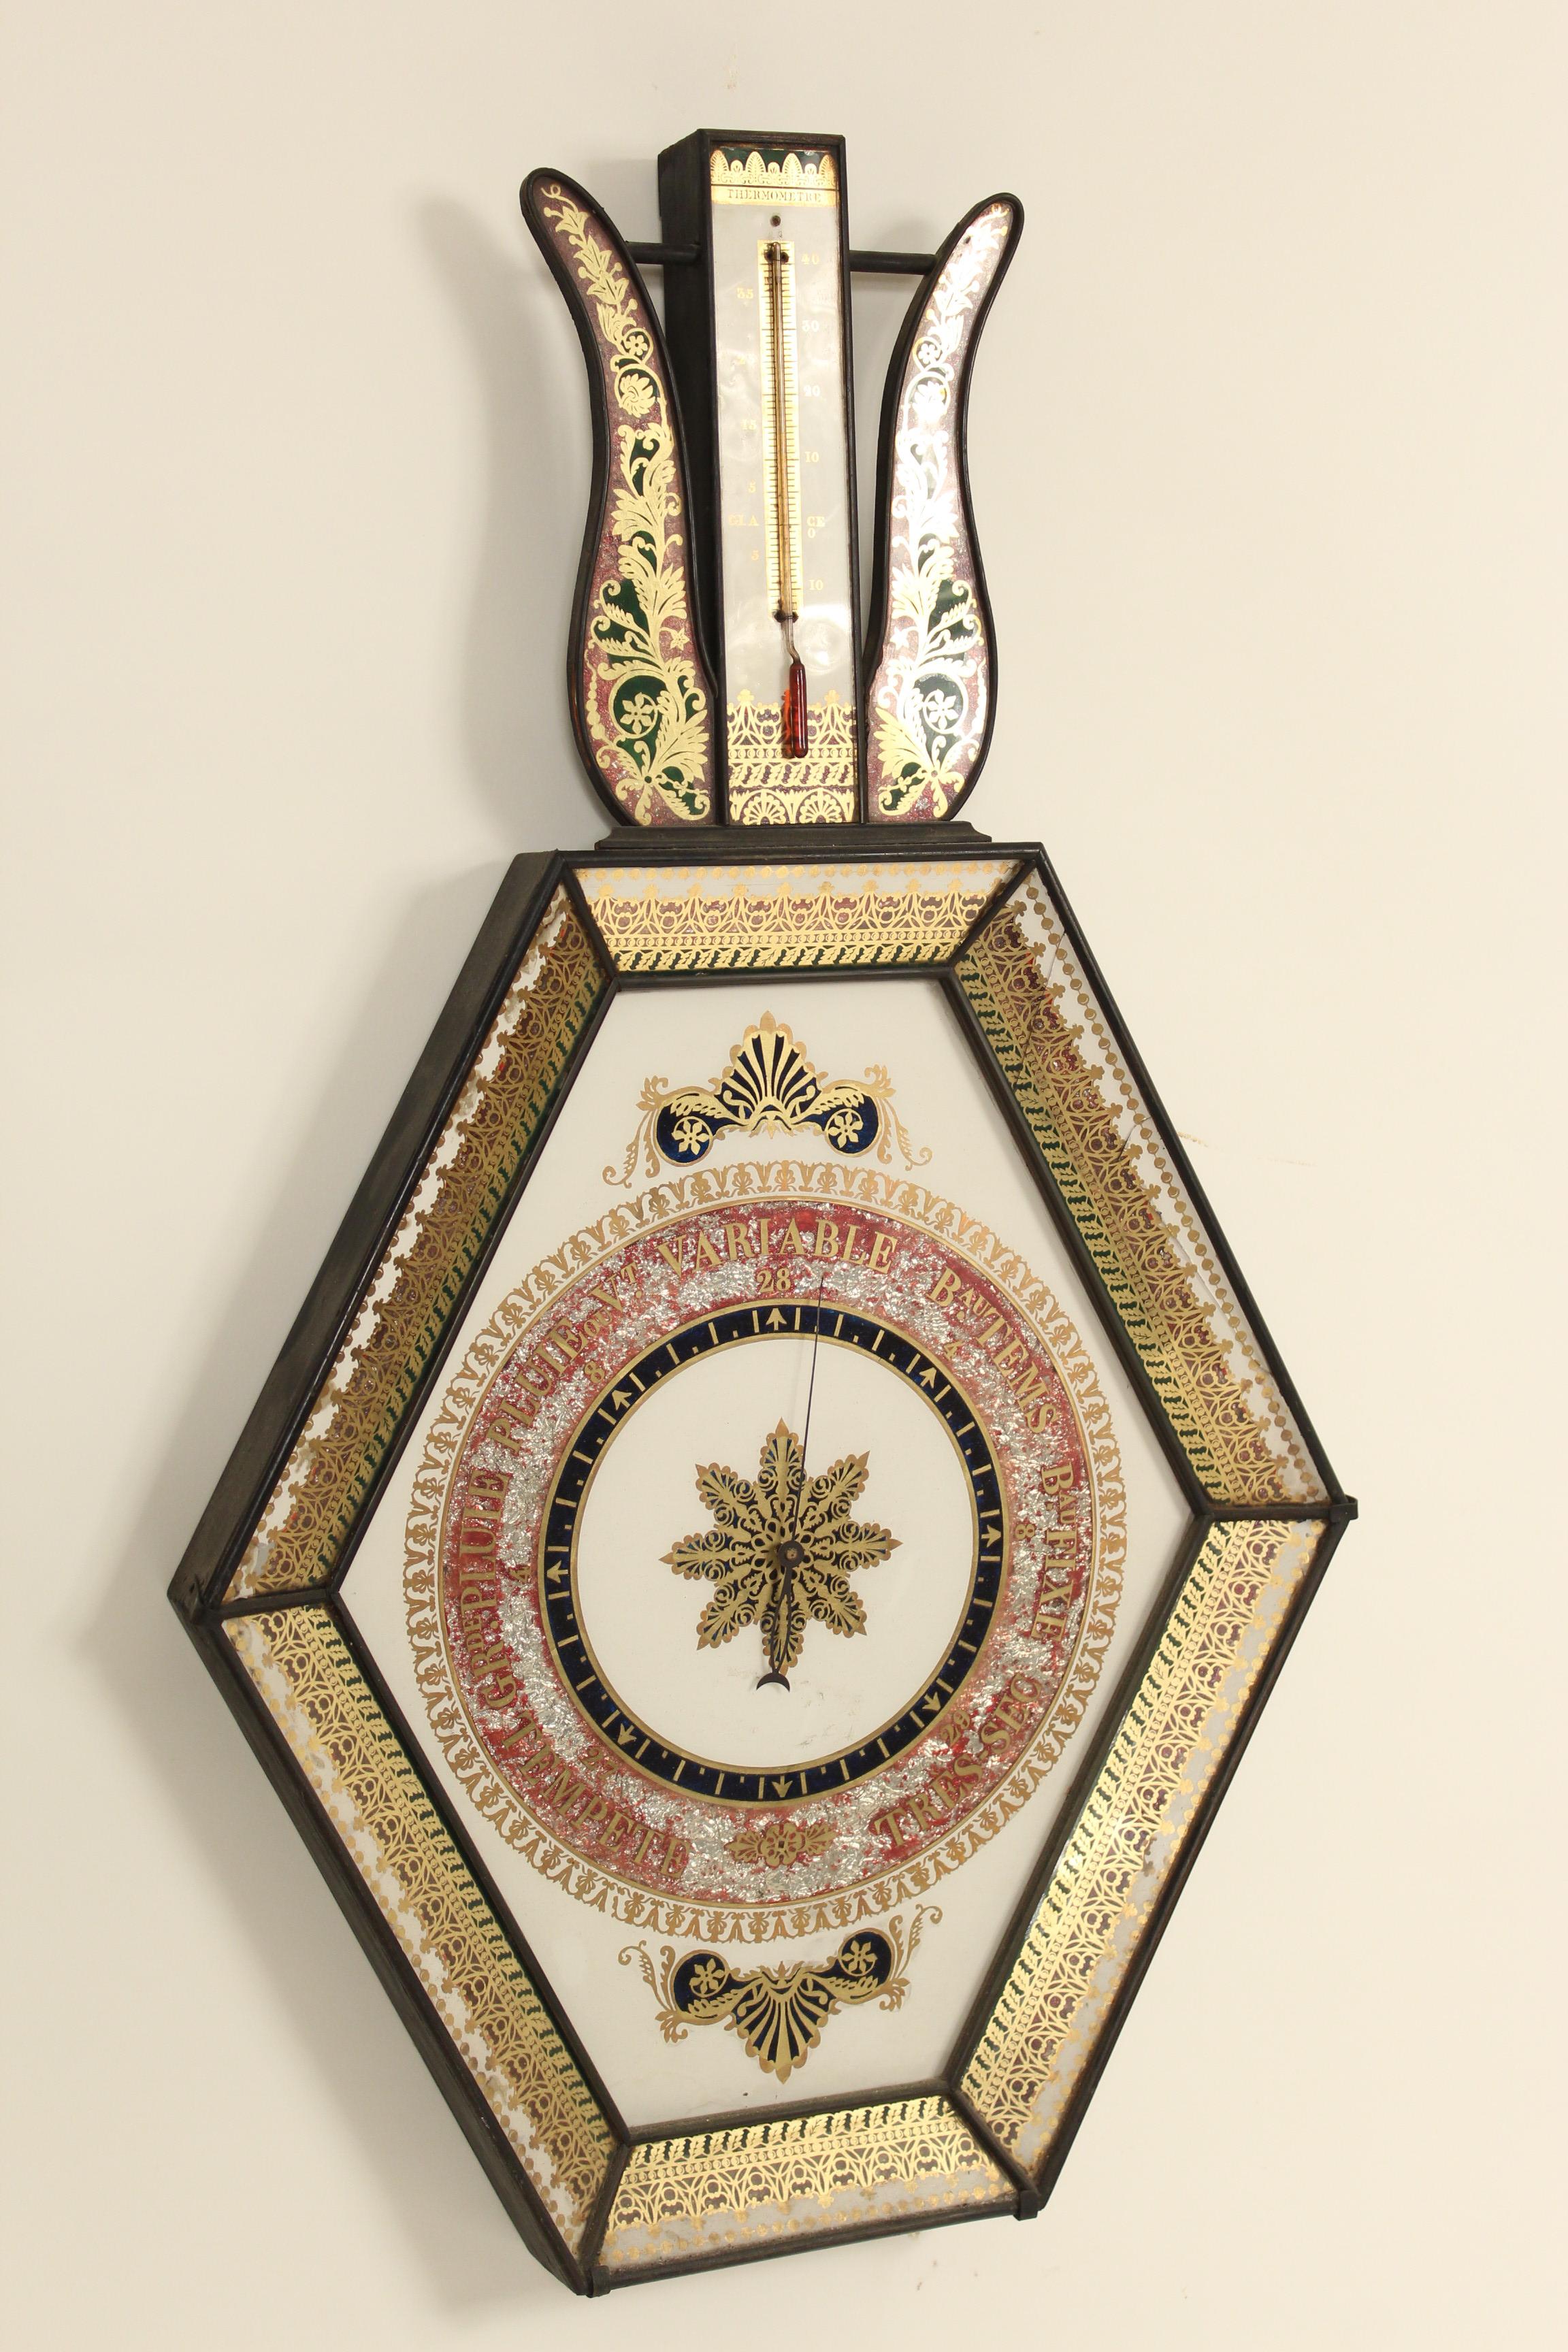 Antique Directoire style verre églomisé glass barometer, 19th century. Barometer is not functional it is purely decorative.